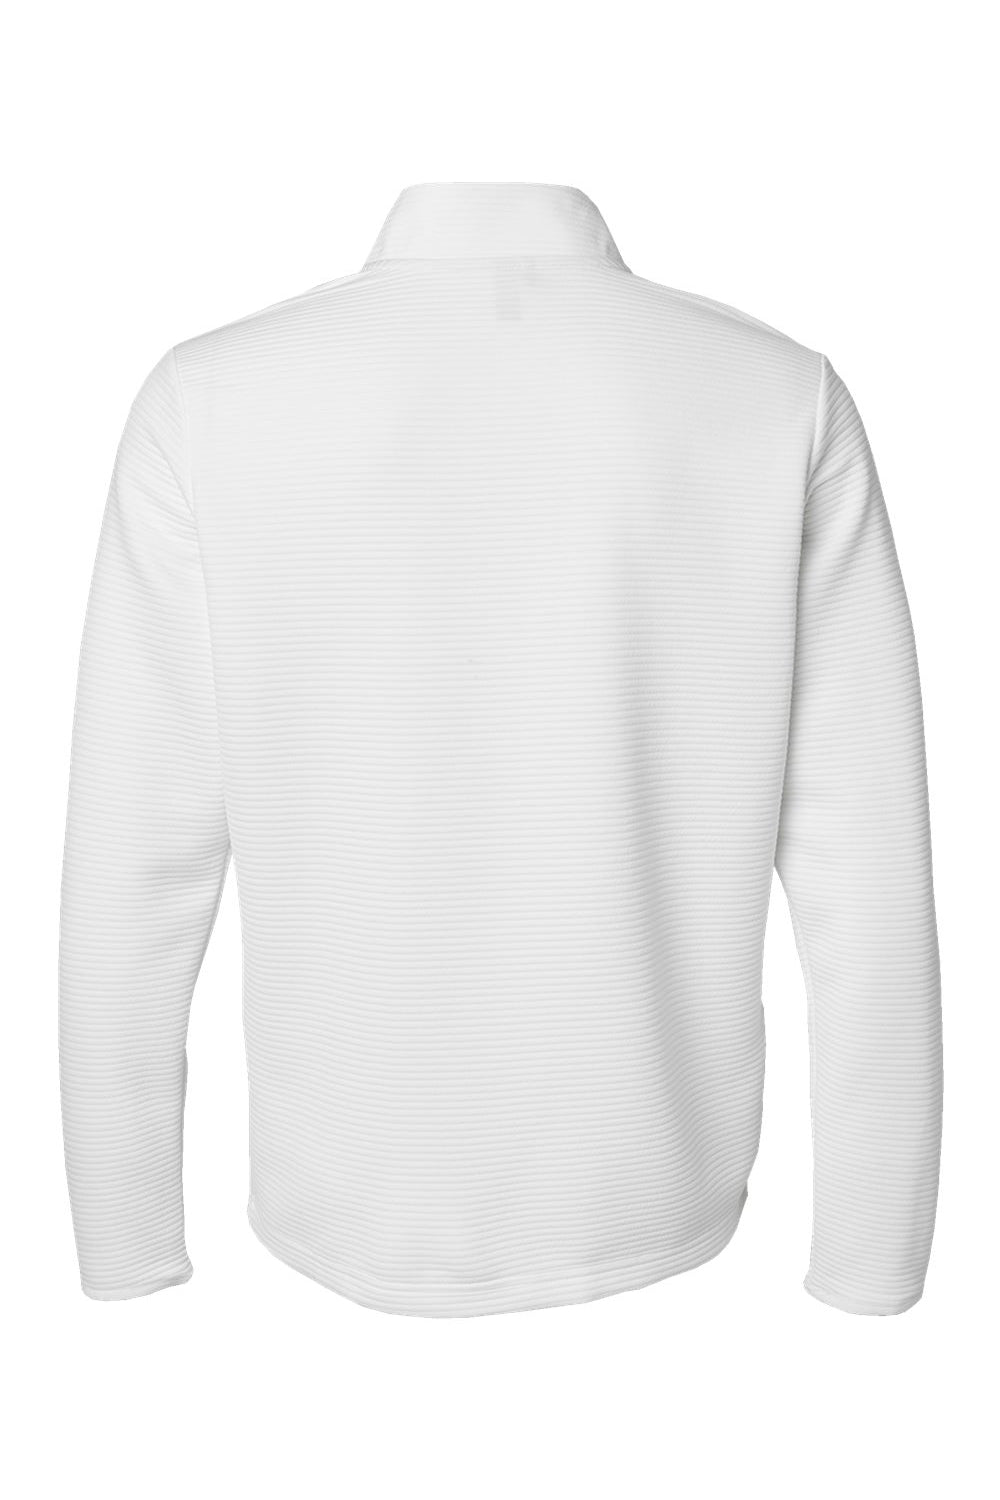 Adidas A588 Mens Spacer 1/4 Zip Pullover Core White Flat Back